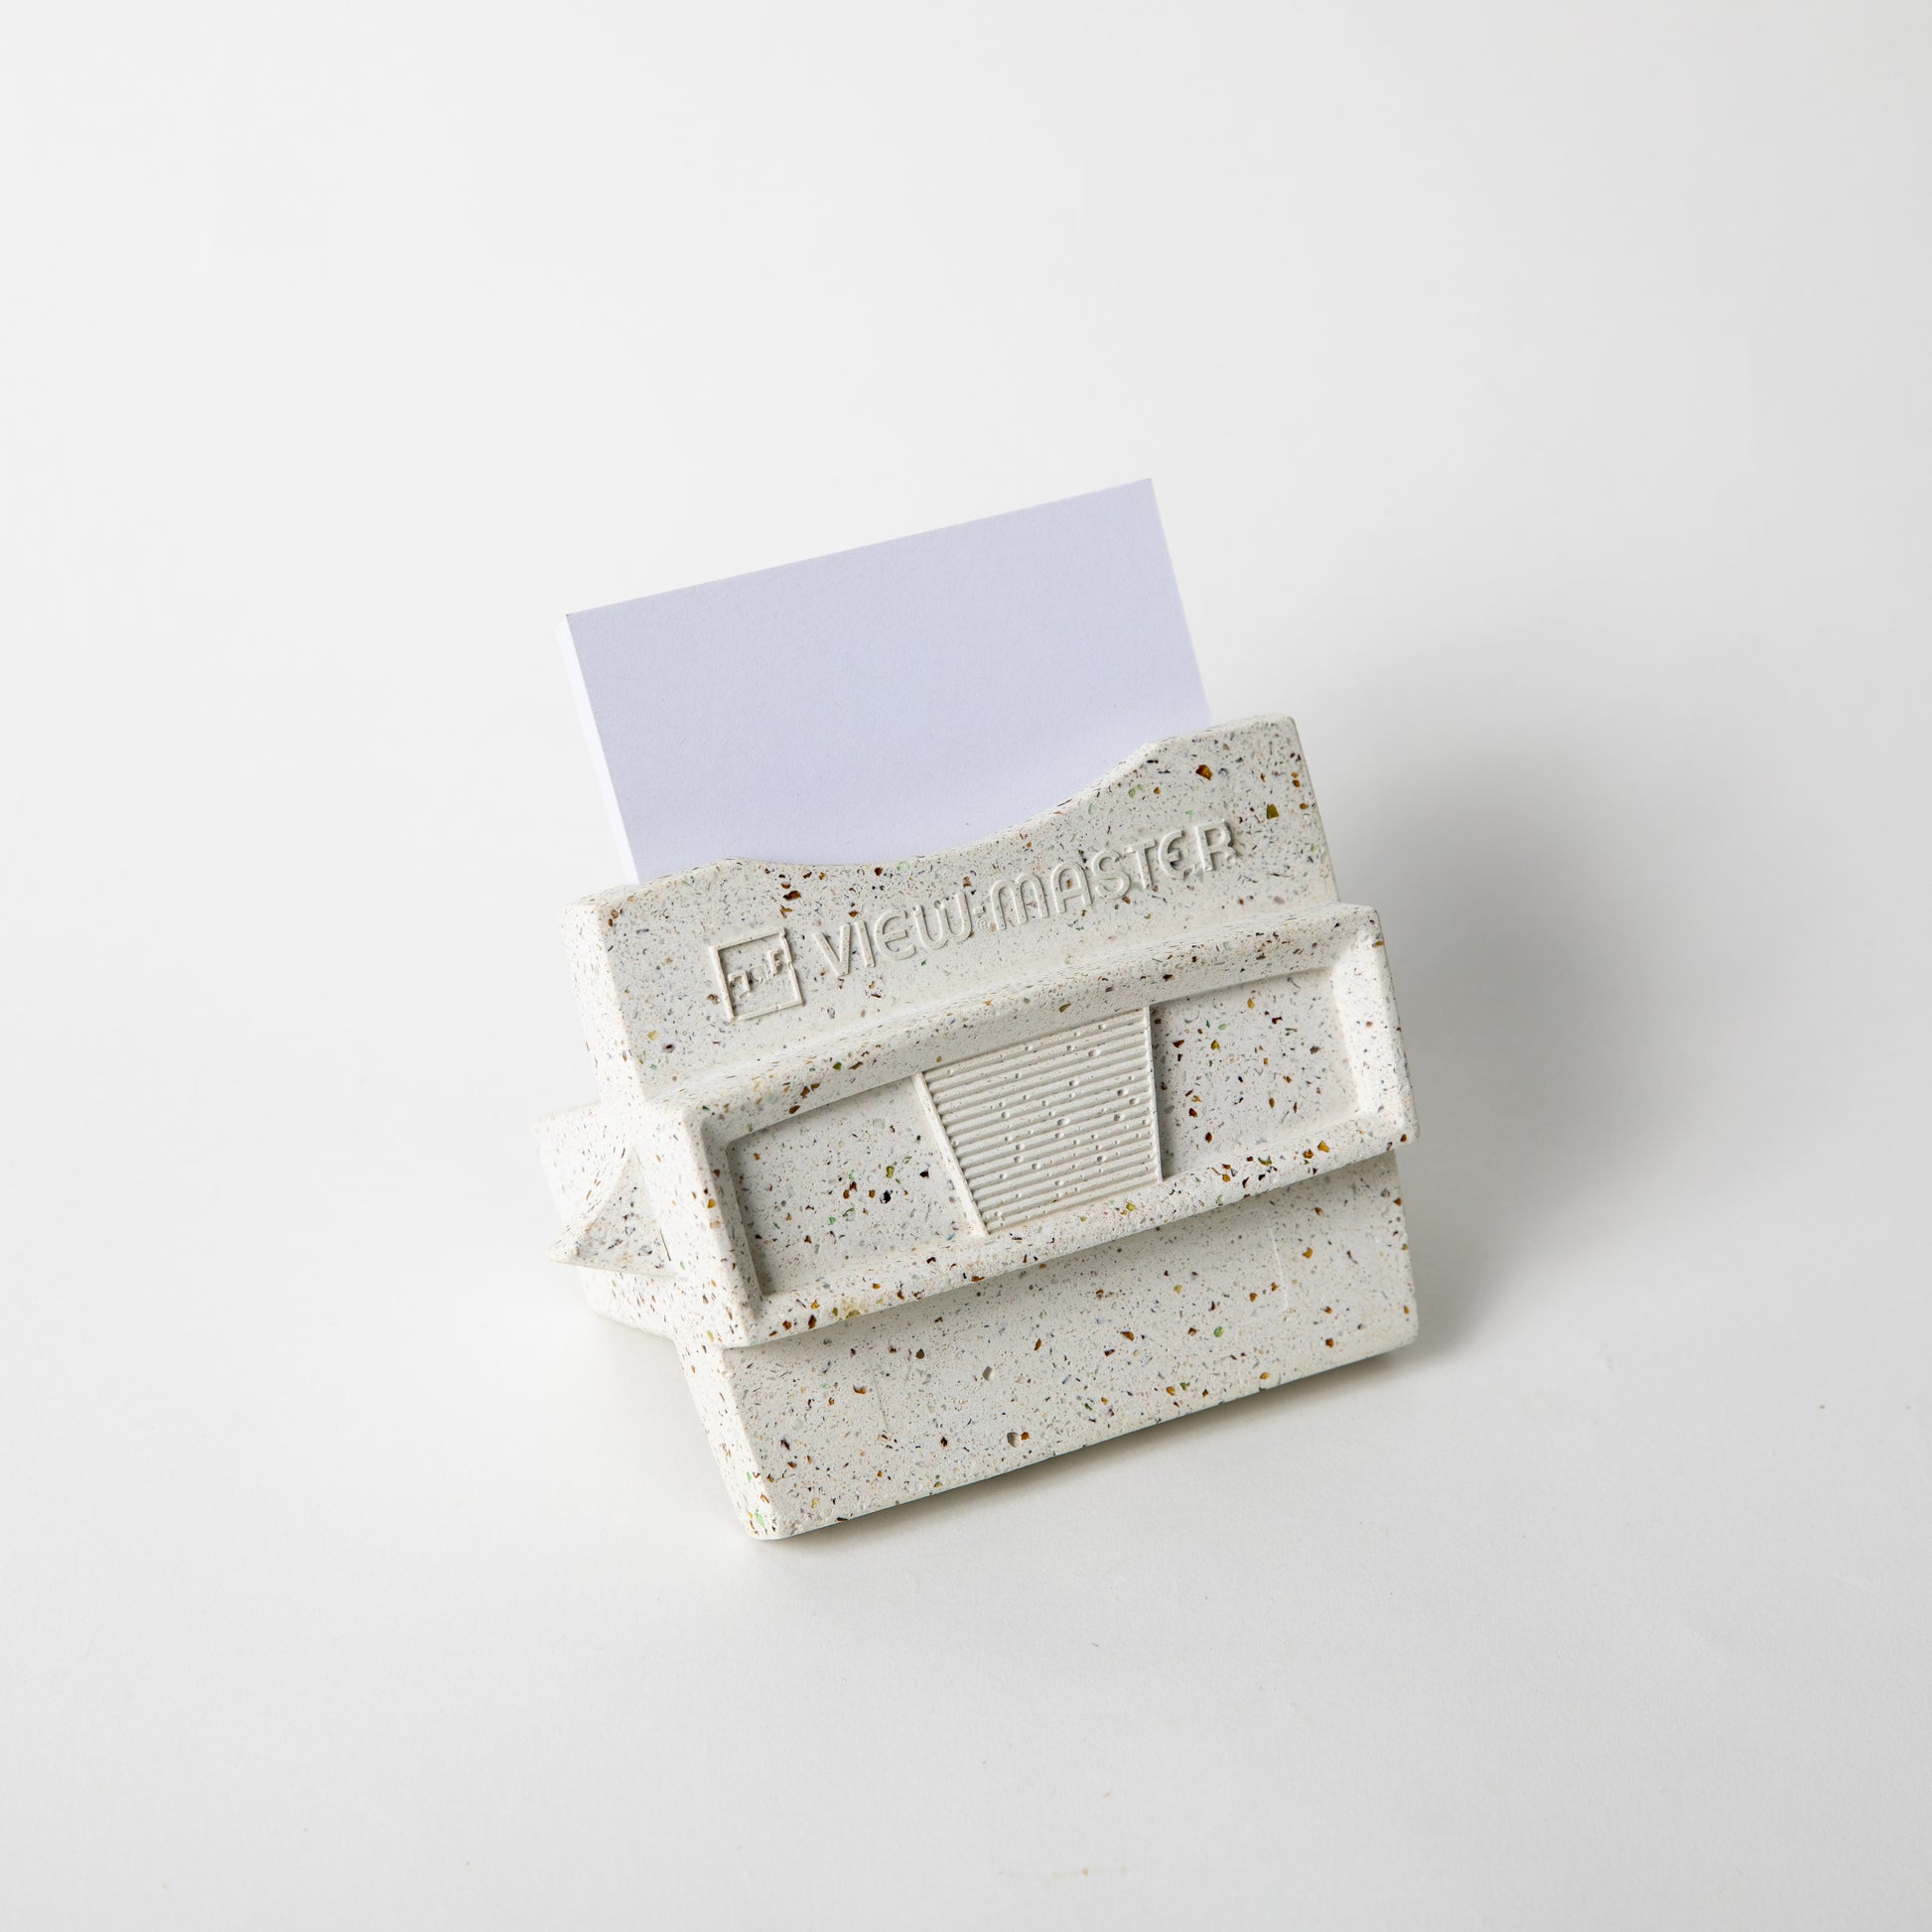 The retro business card holder in white terrazzo w/ blank business cards placed inside.